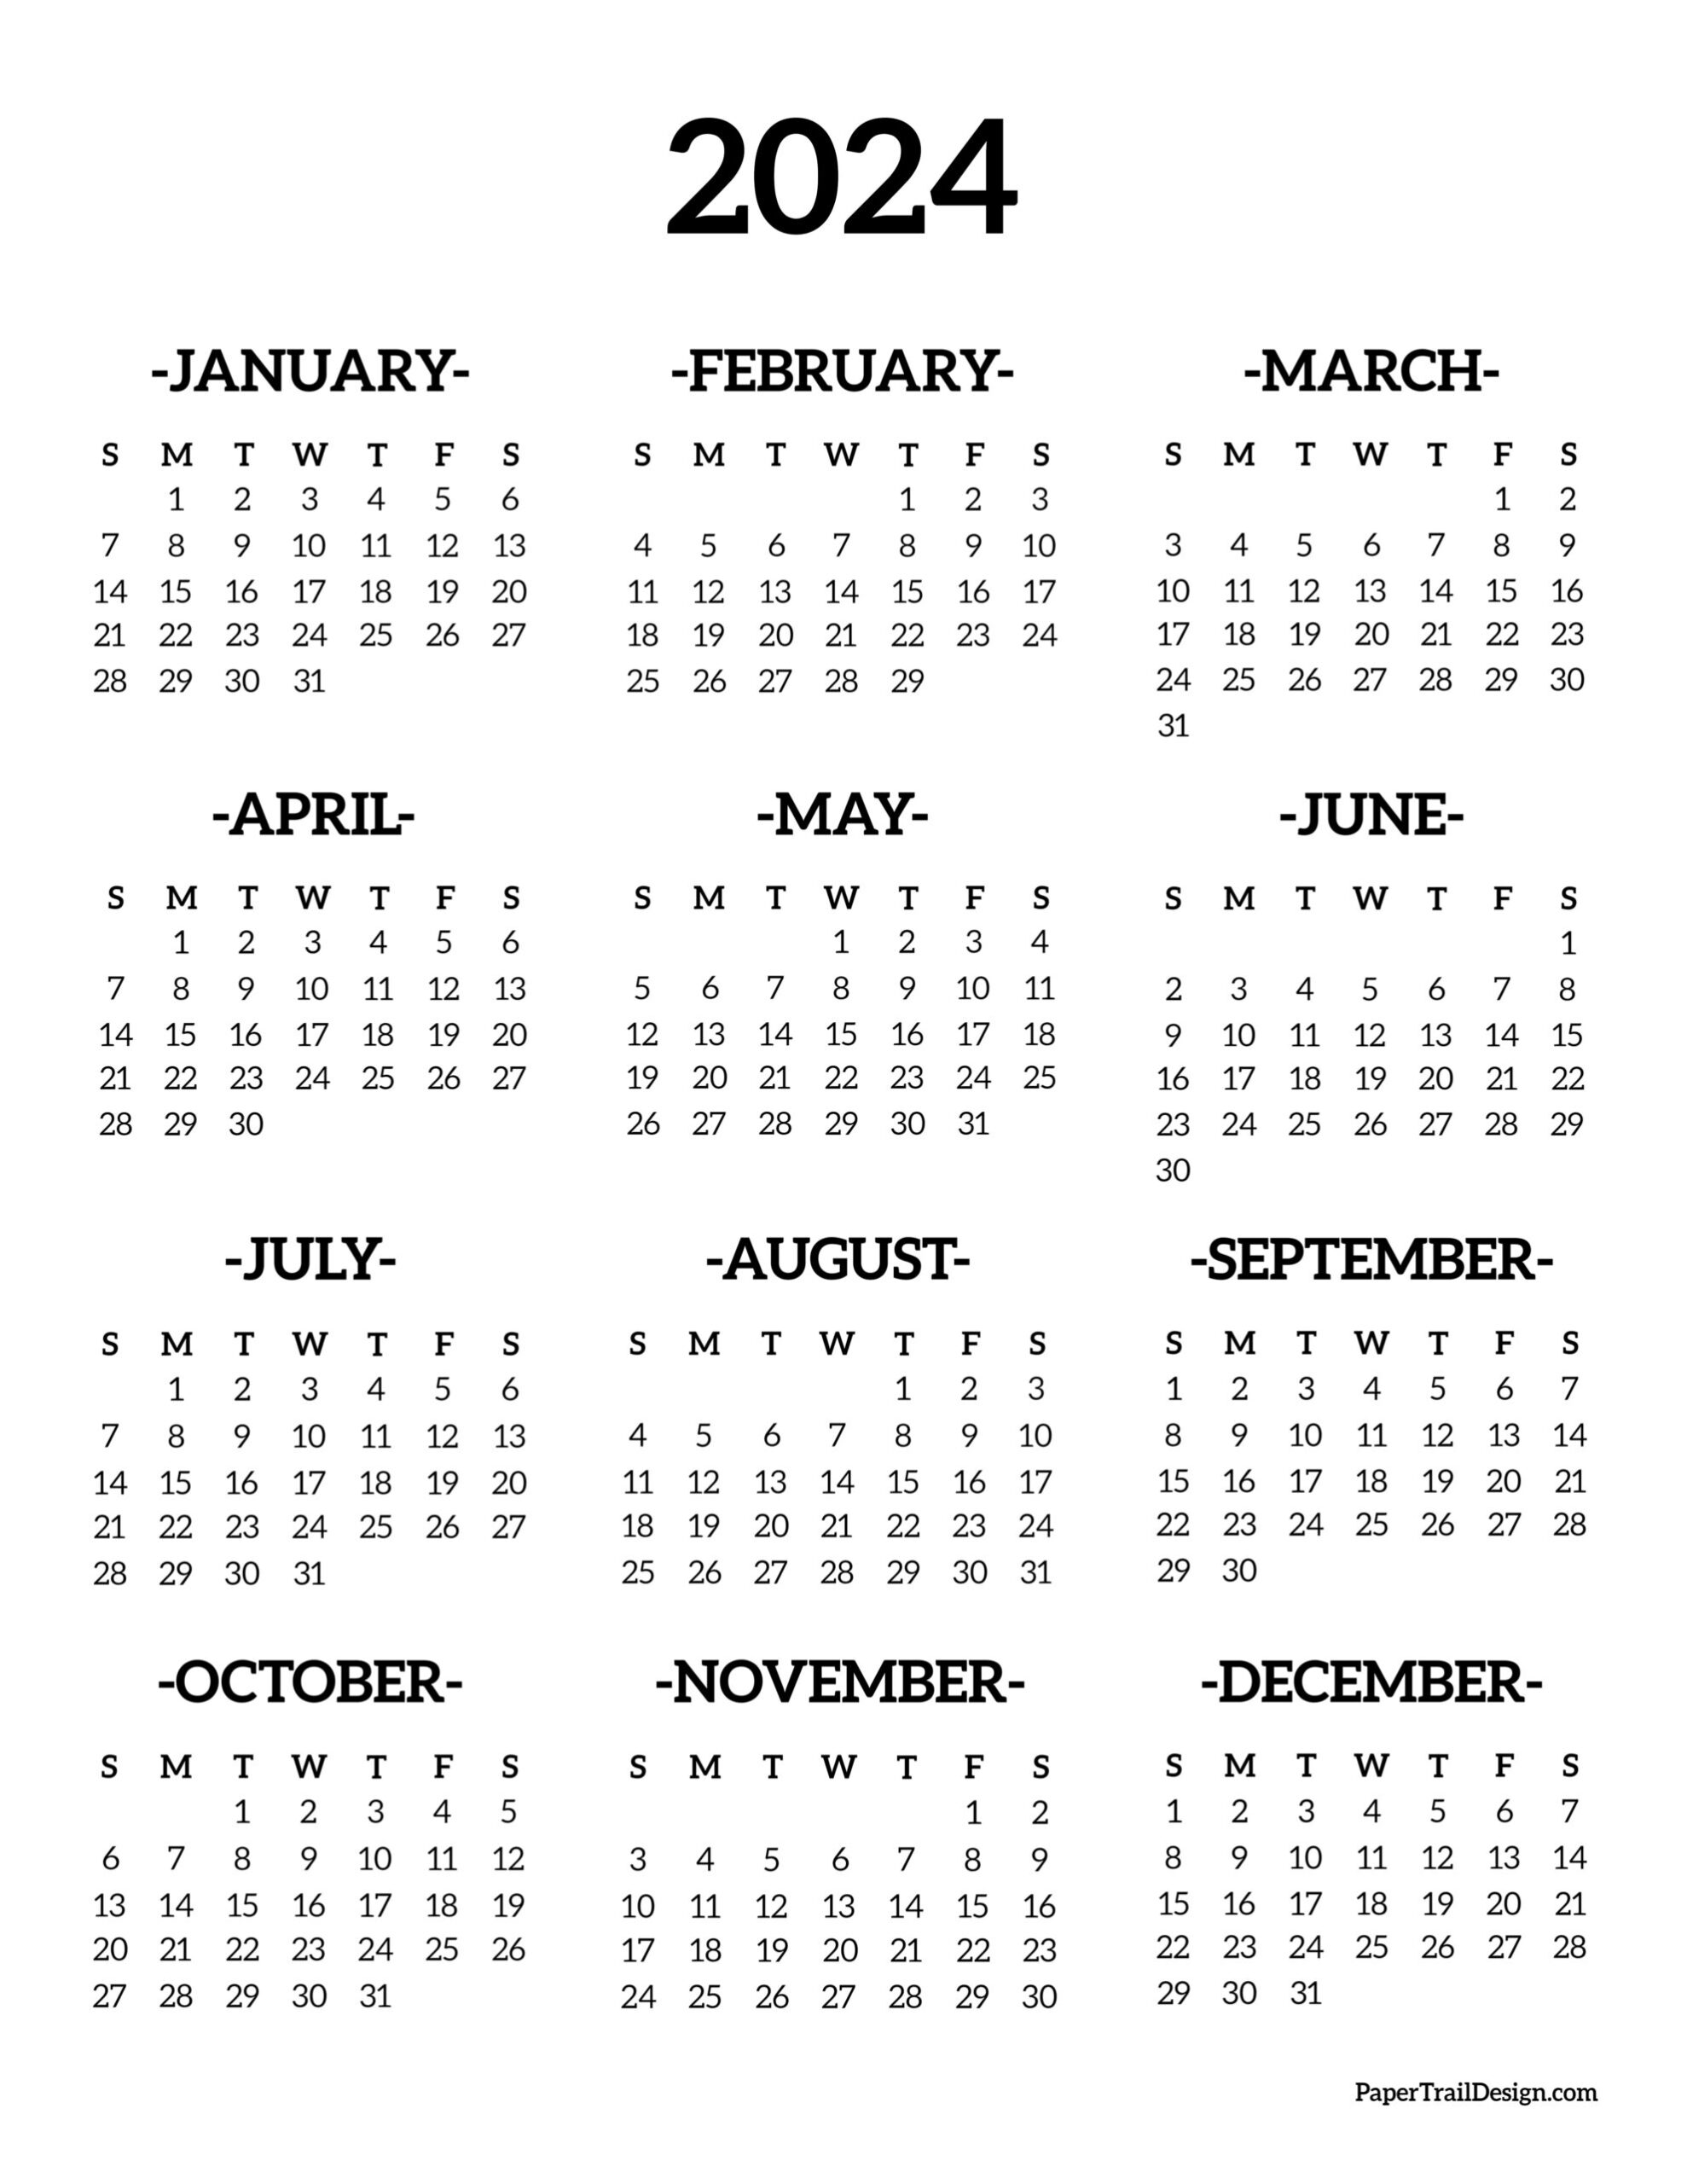 Calendar 2024 Printable One Page - Paper Trail Design for Calendar For 2024 Printable Free